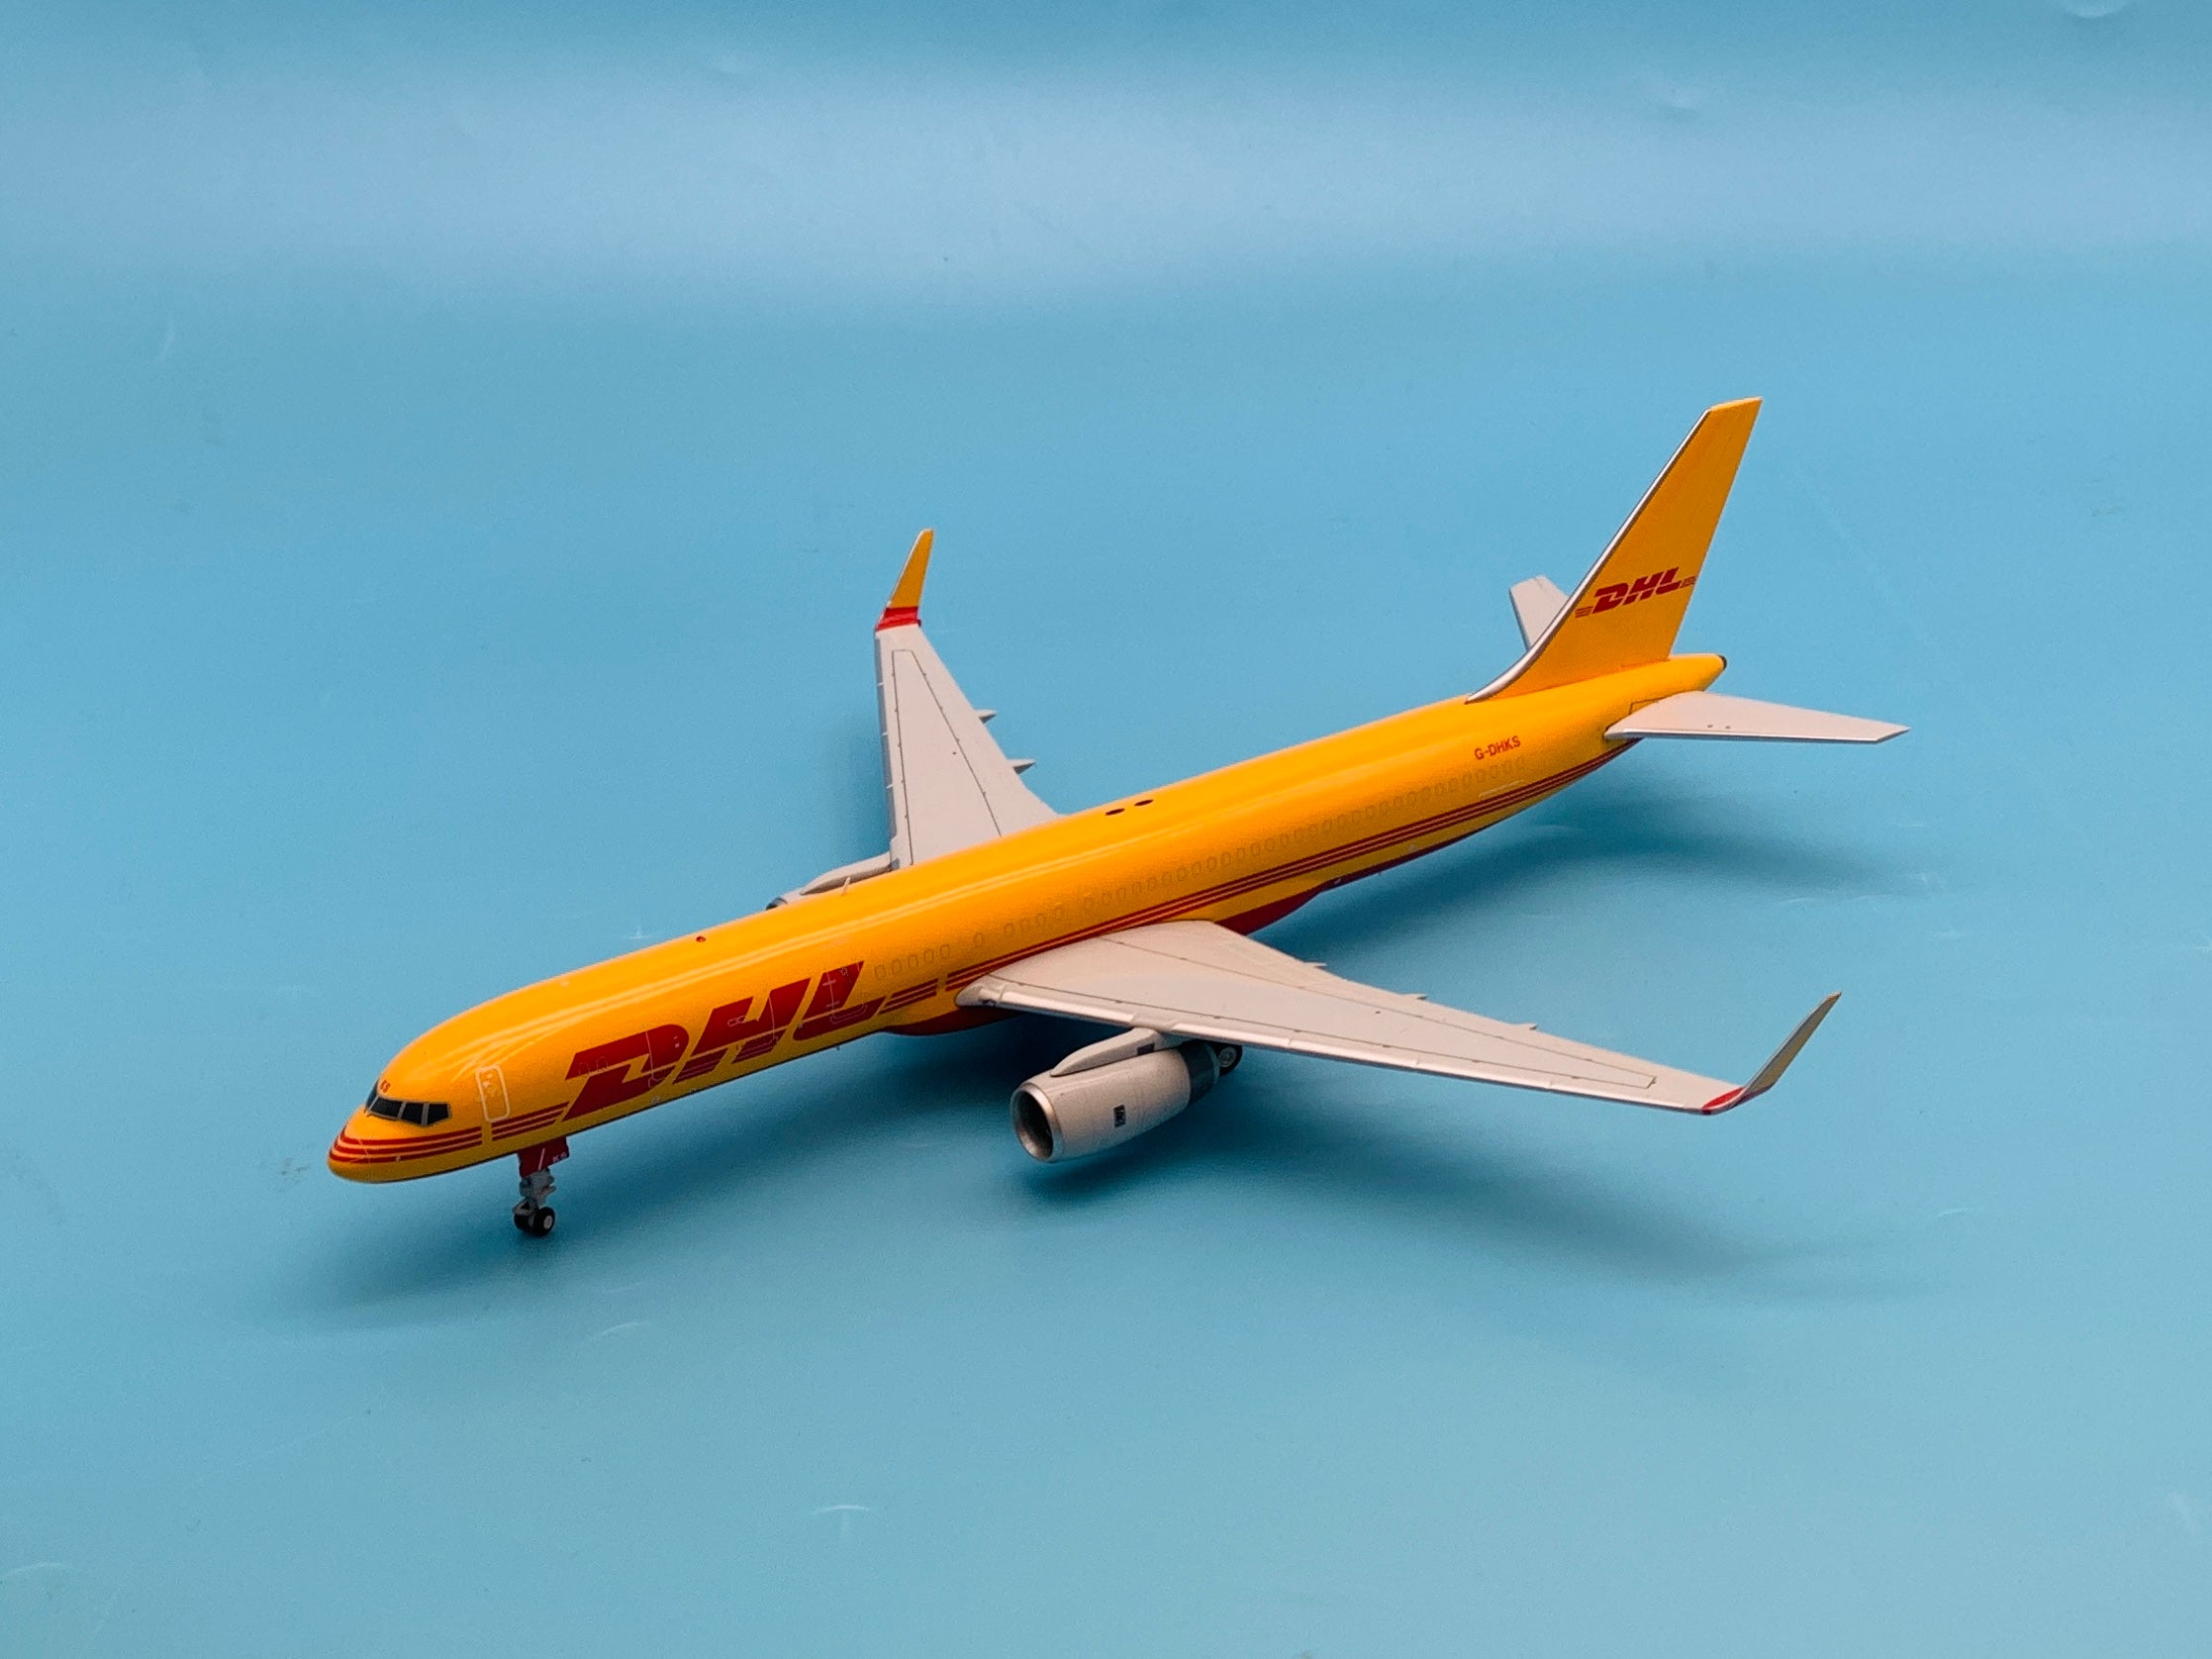 JC Wings 1/200 DHL Air Boeing 757-200(PCF) G-DHKS – First Class